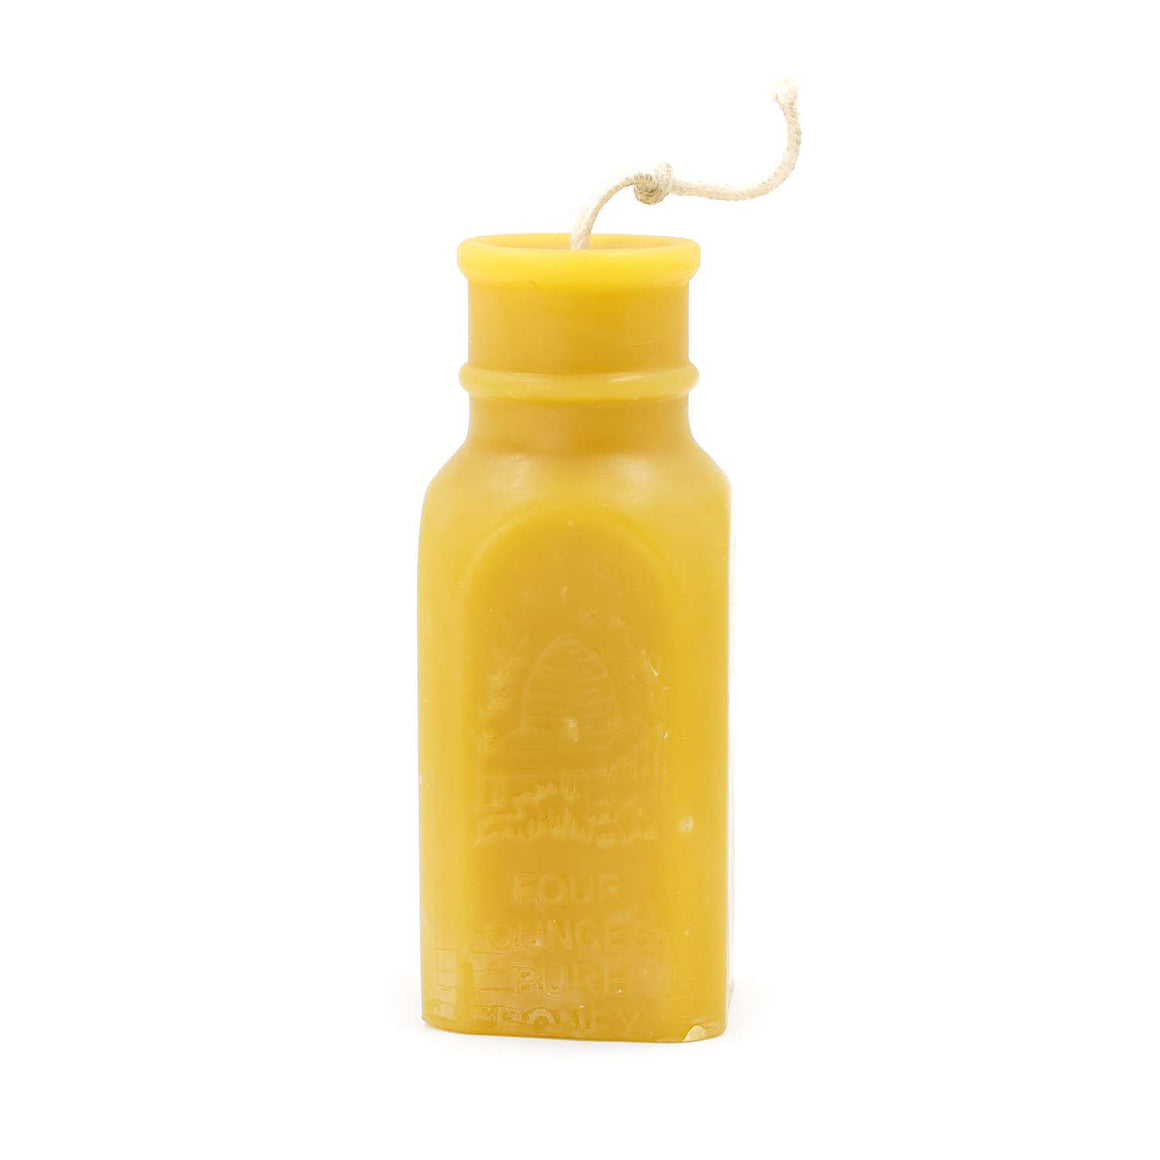 The Candle Works | Honey Jar Beeswax Candle | 4 oz